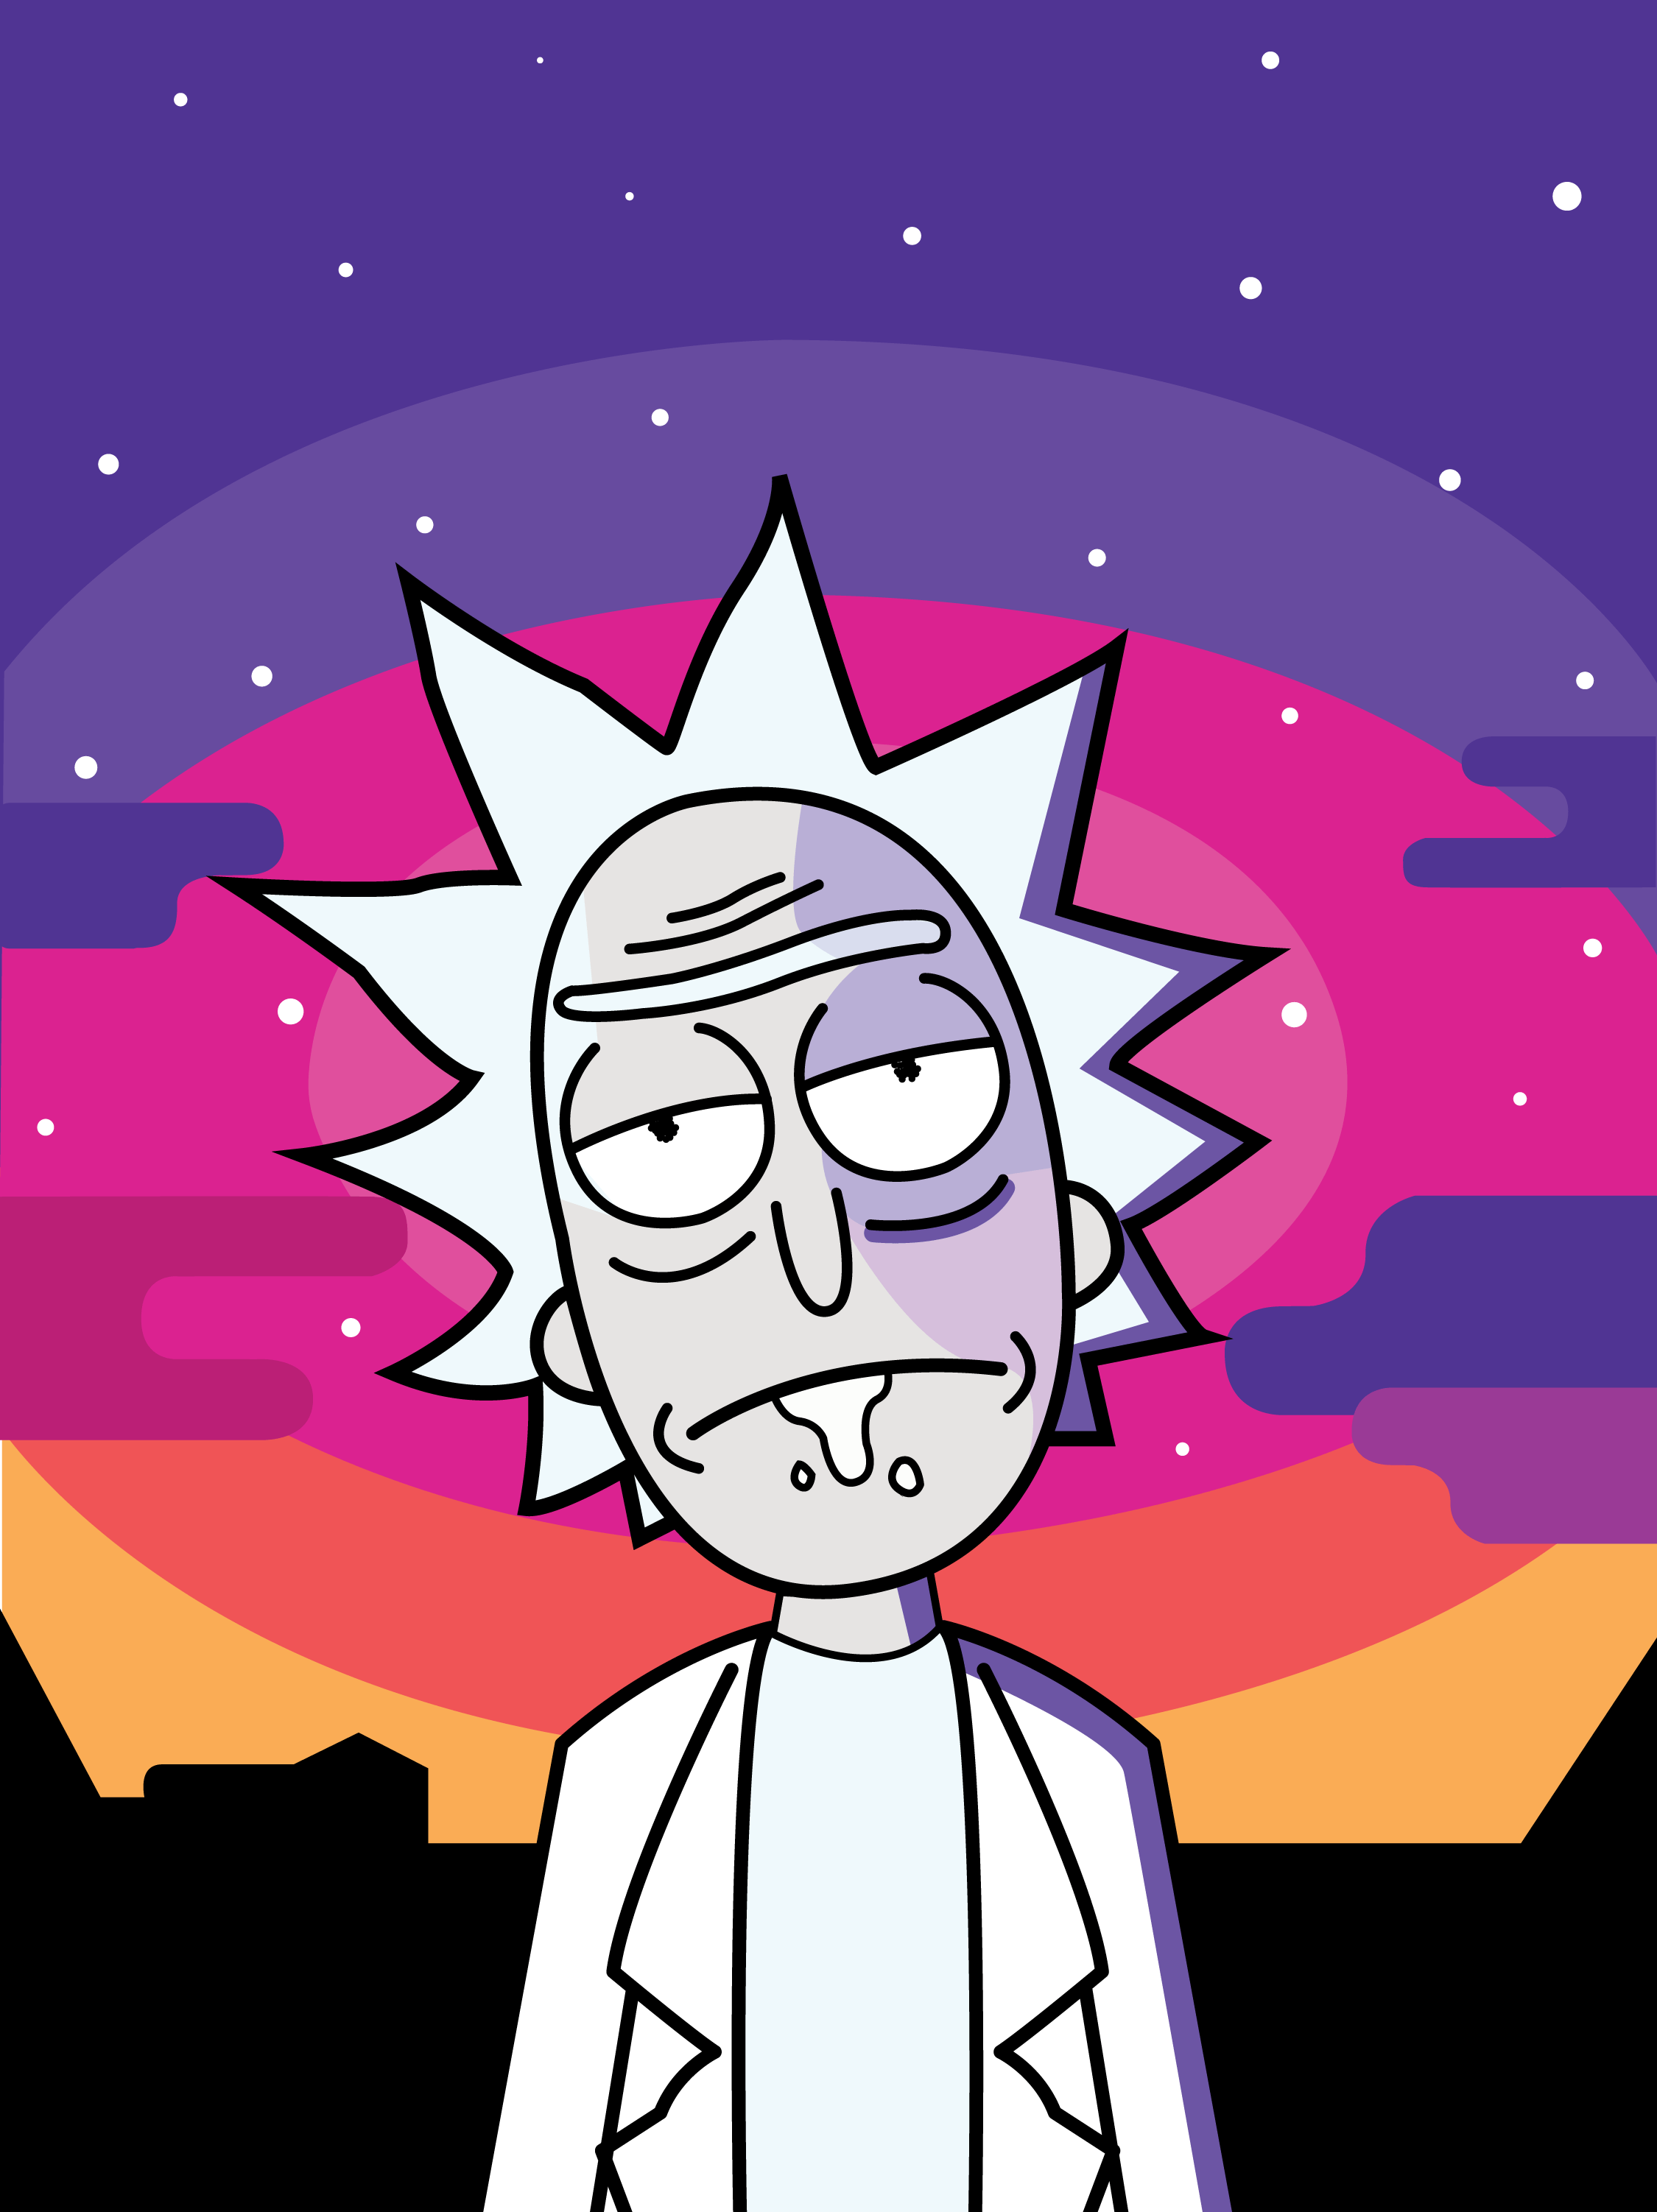 ricky and morty wallpapers hd 4k 2